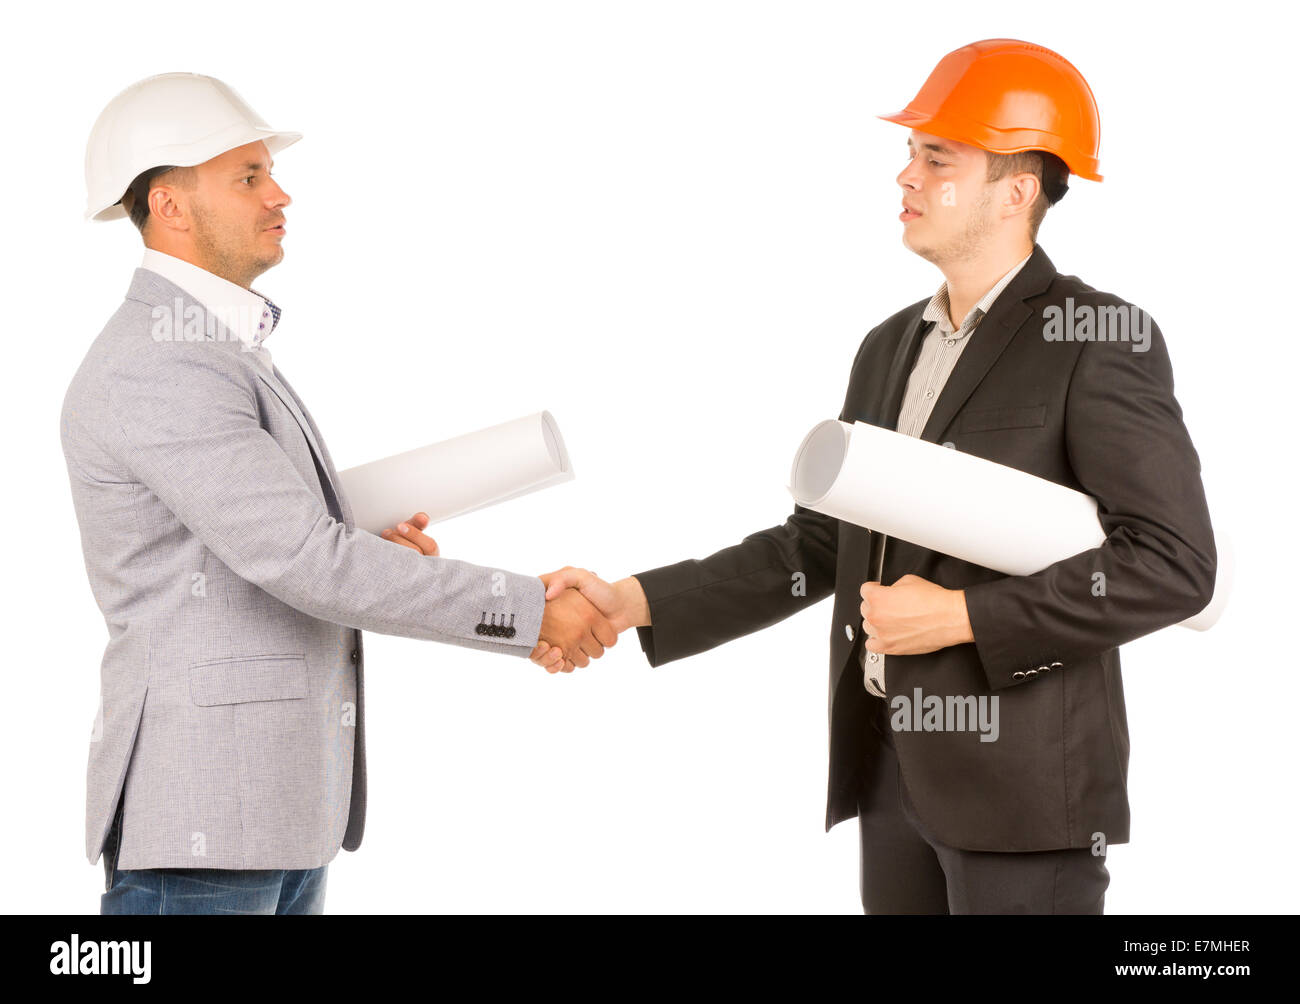 Middle Age Engineers in Gray and Black Attire Shaking Hands and Holding Blueprints. Isolated on White Background. Stock Photo